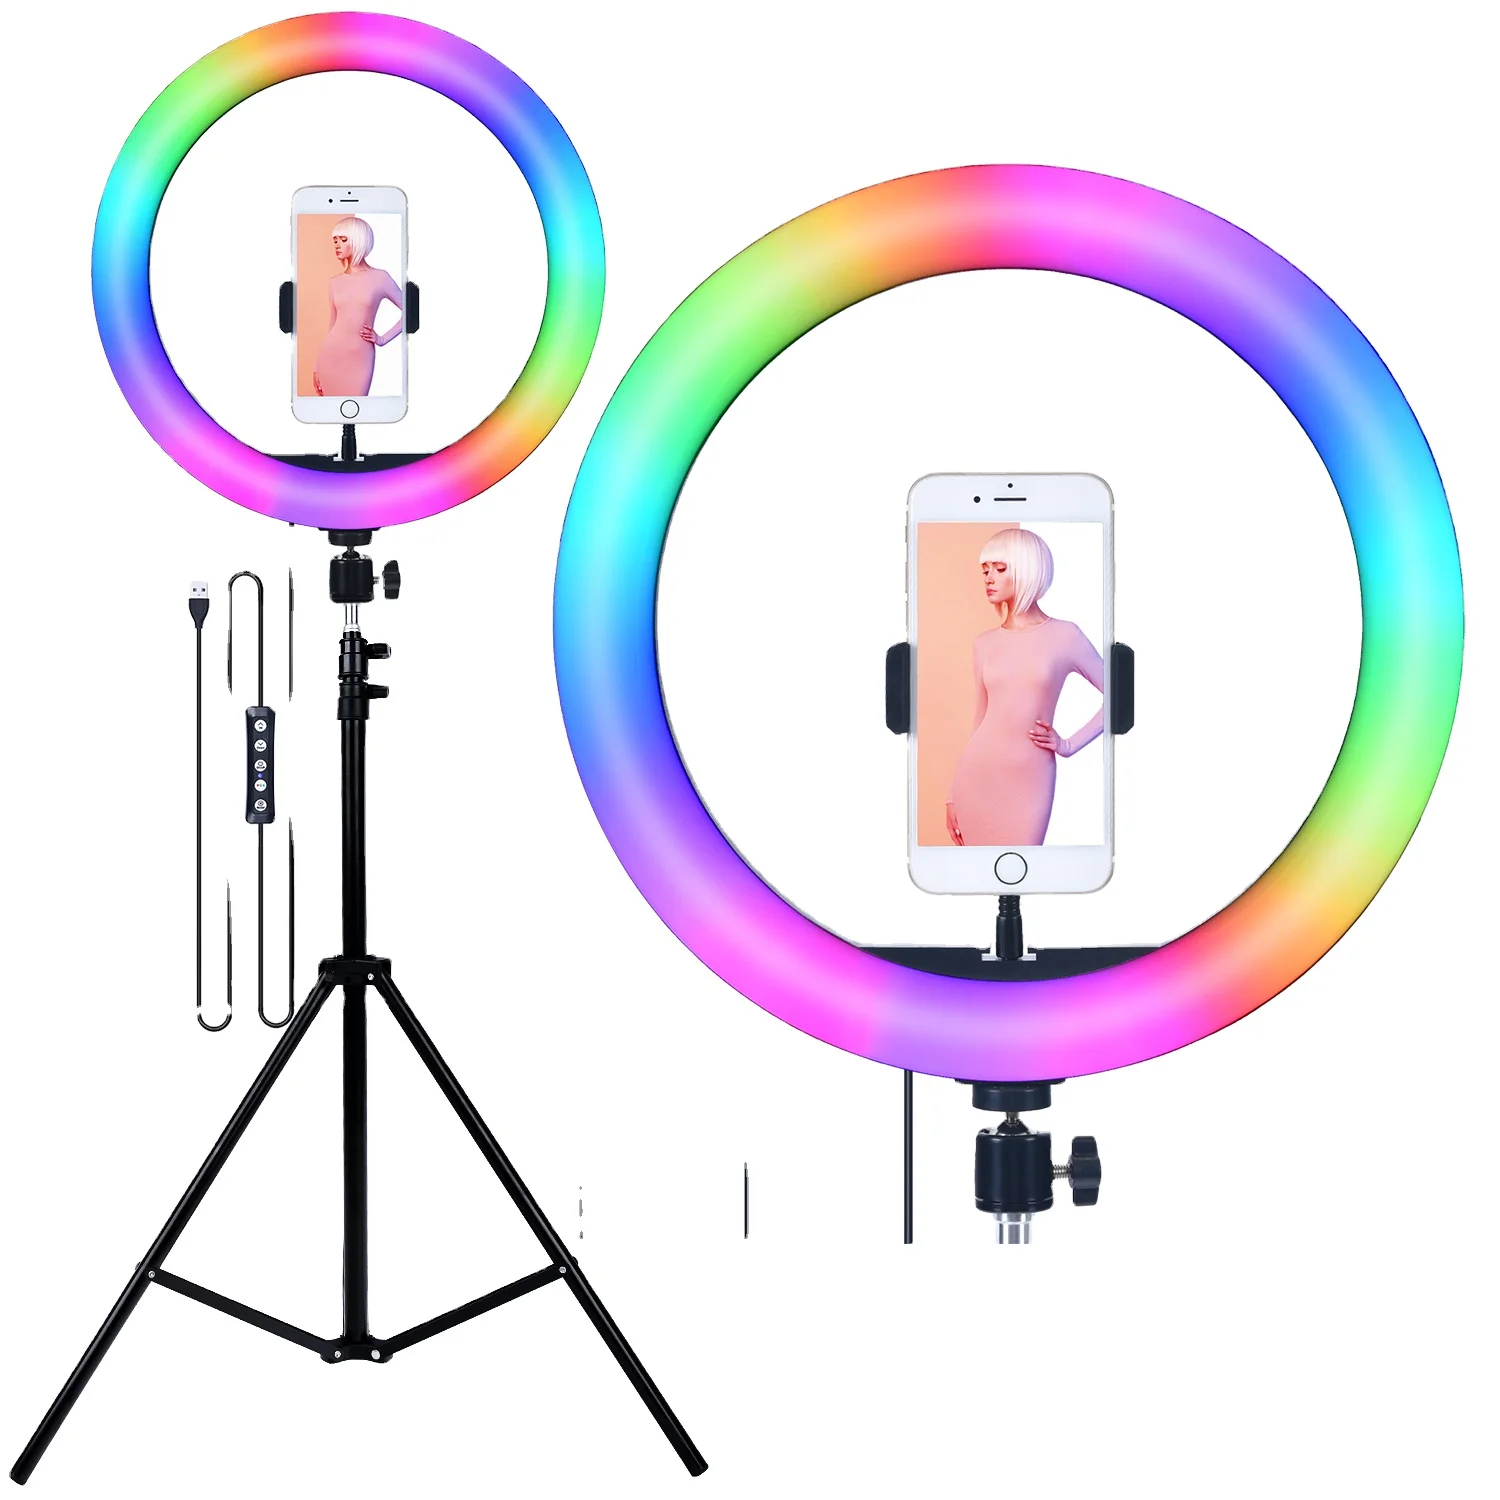 

FOSOTO 13 inch RGB Led ring light With Tripod Stand And phone holder Selfie Ring lamp for youtube video makeup live streaming, Black